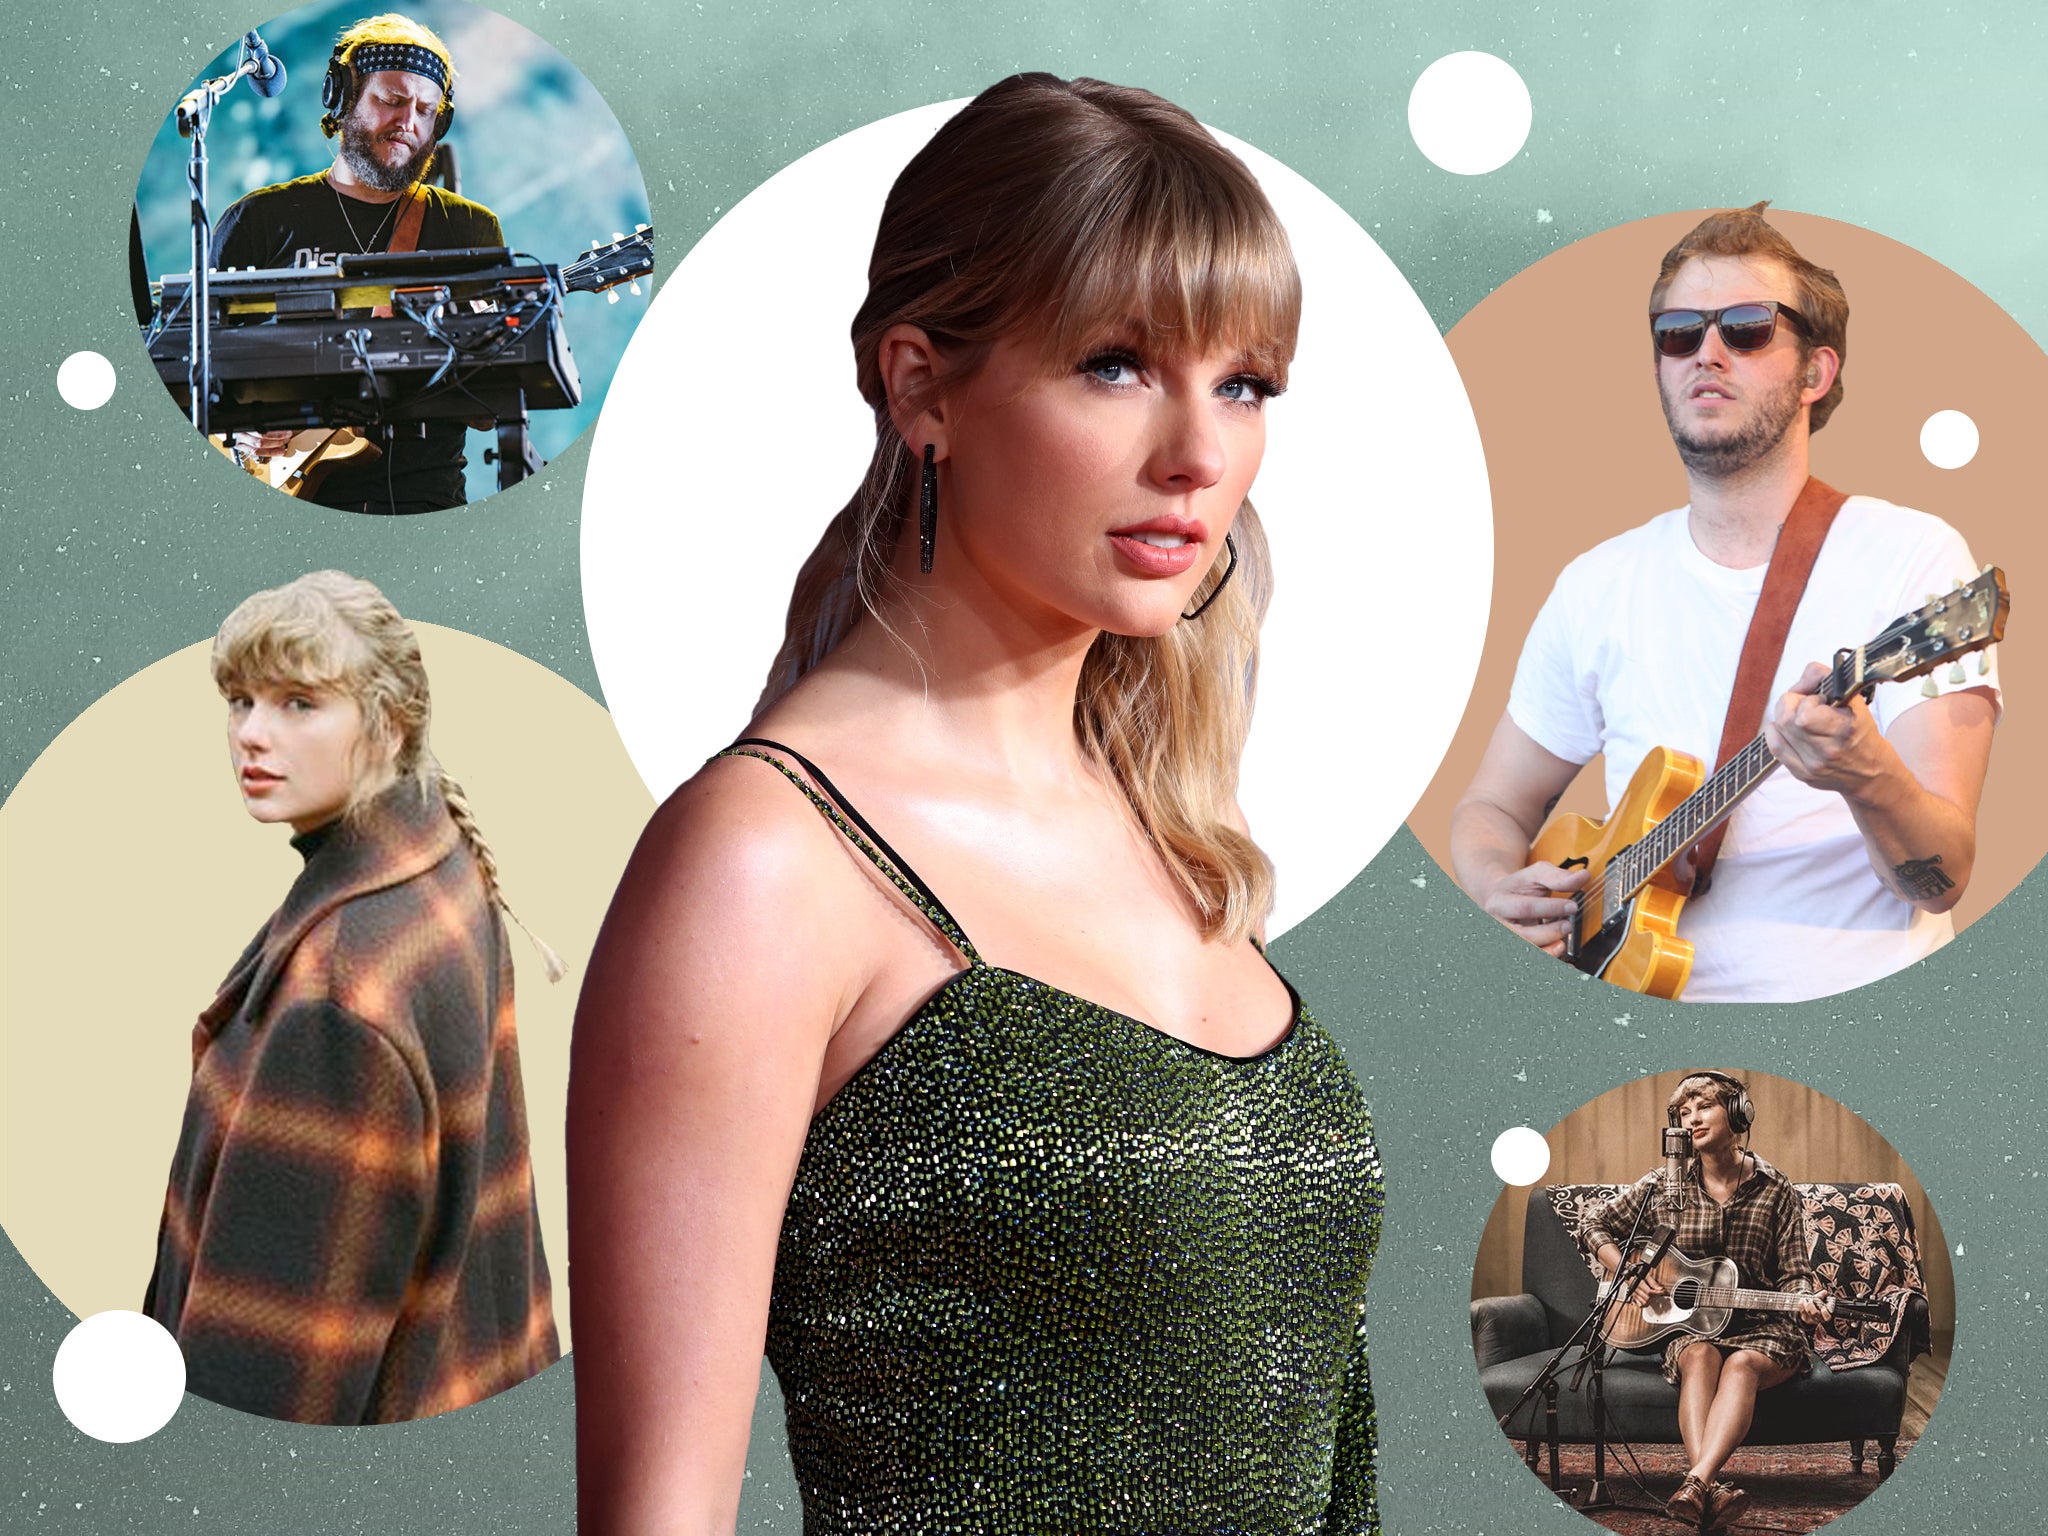 The National's Aaron Dessner collaborates with Taylor Swift on